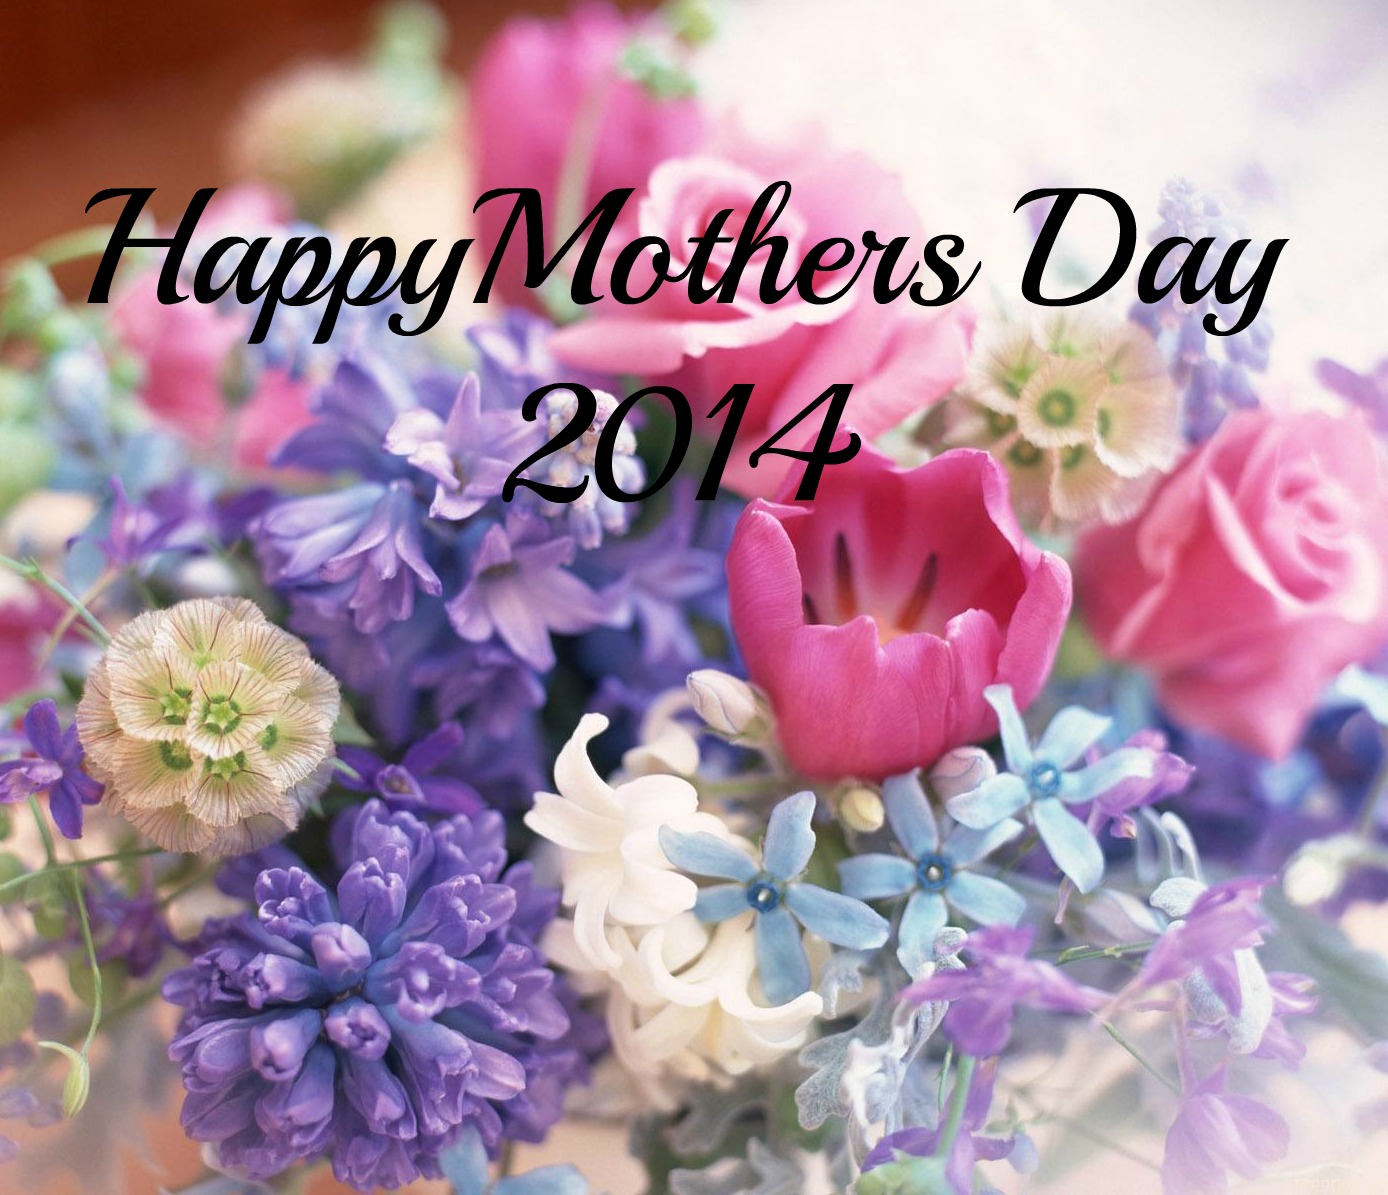 Have a Happy Mother’s Day…2014